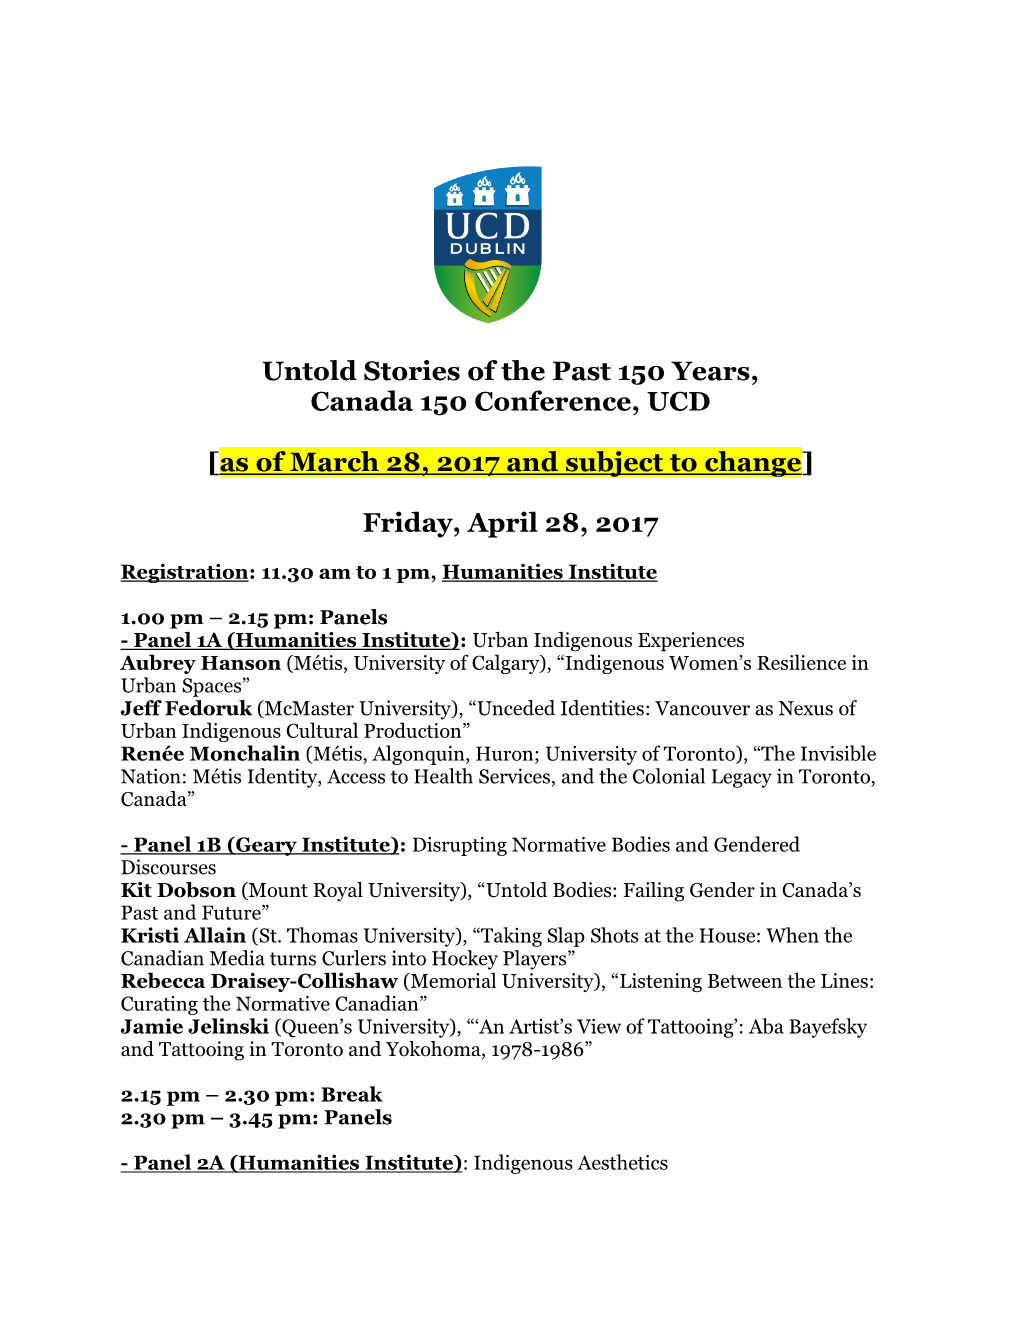 Untold Stories of the Past 150 Years, Canada 150 Conference, UCD